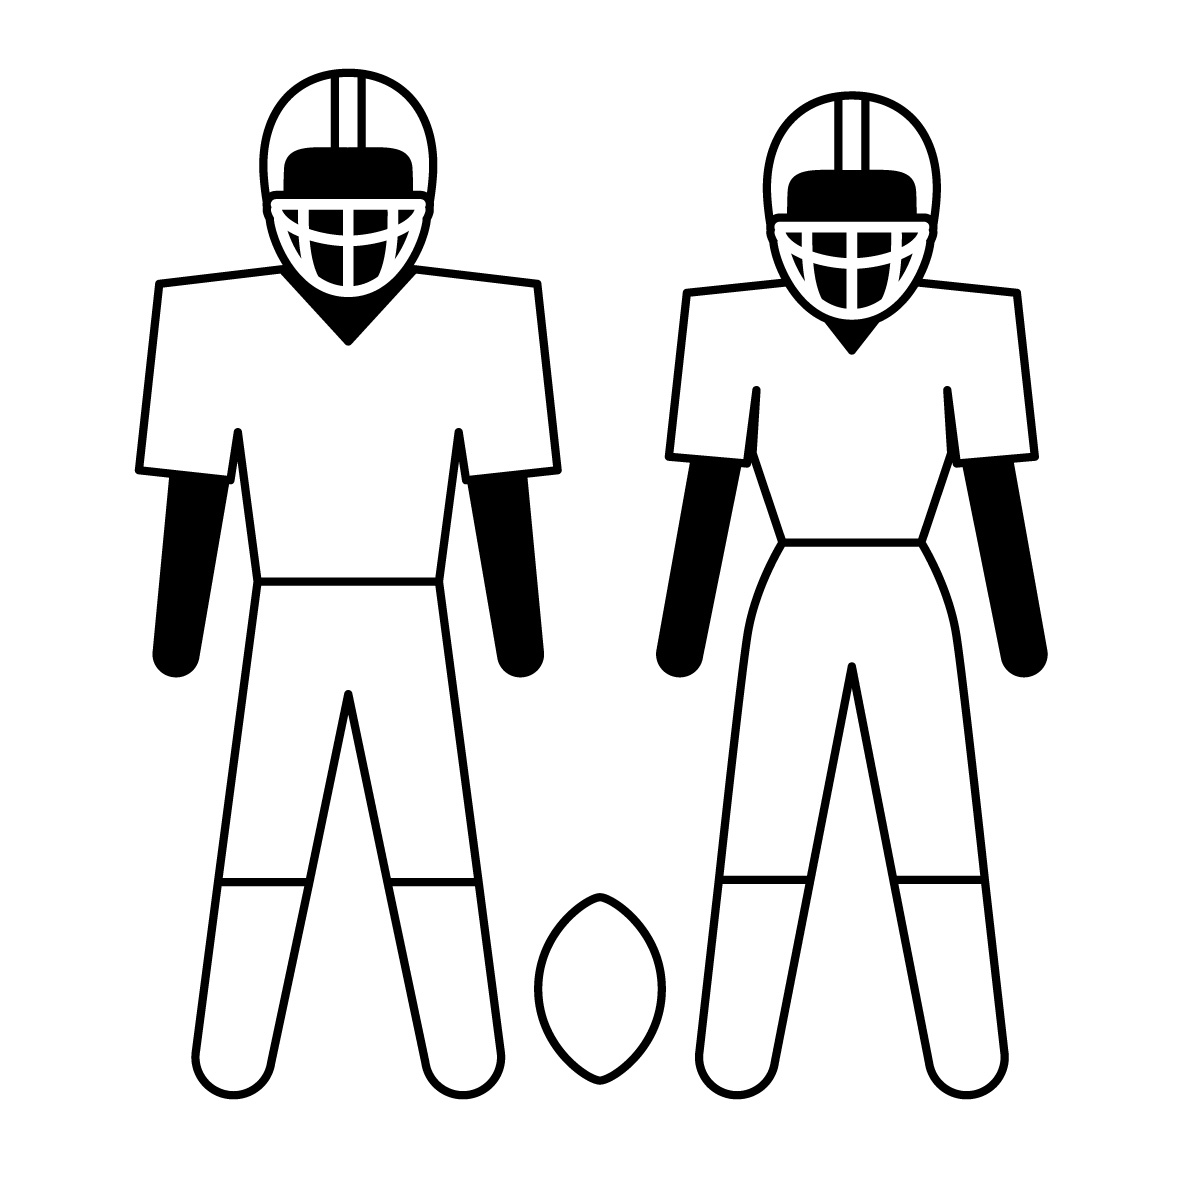 Free Football Reminder Reminder Clipart Icons Clip Art Stick Guy ...